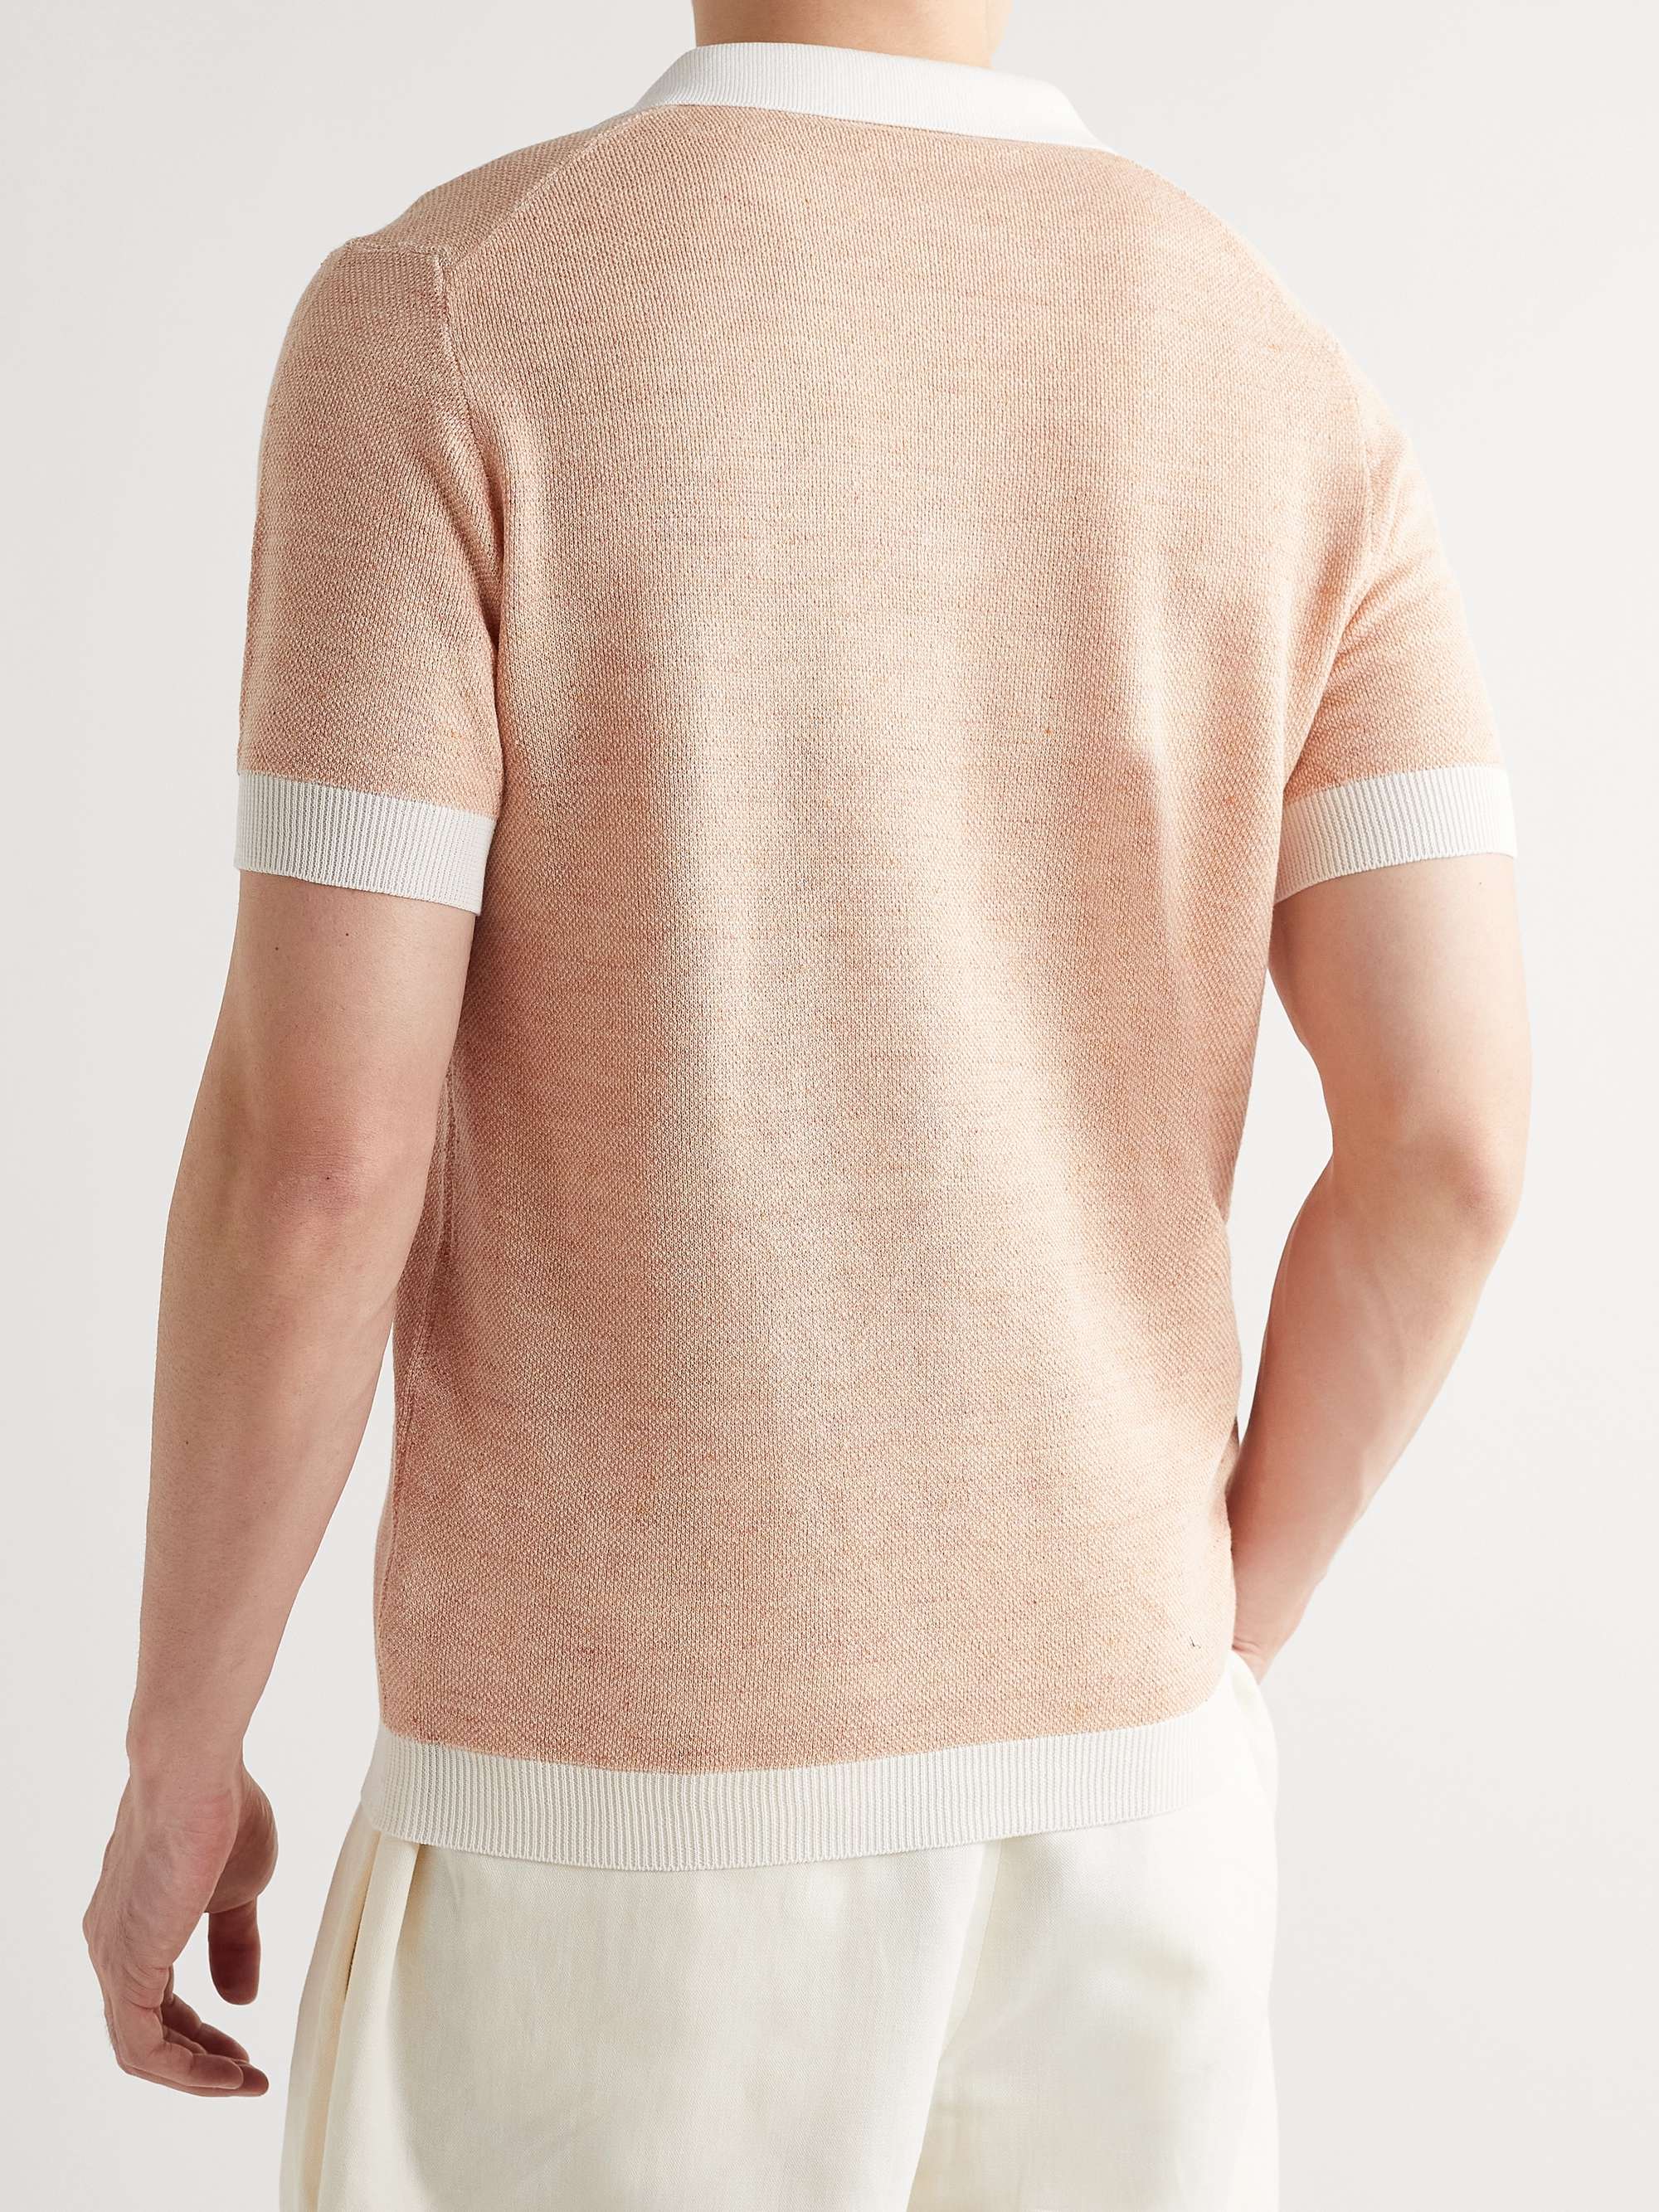 THOM SWEENEY Cotton and Linen-Blend Polo Shirt